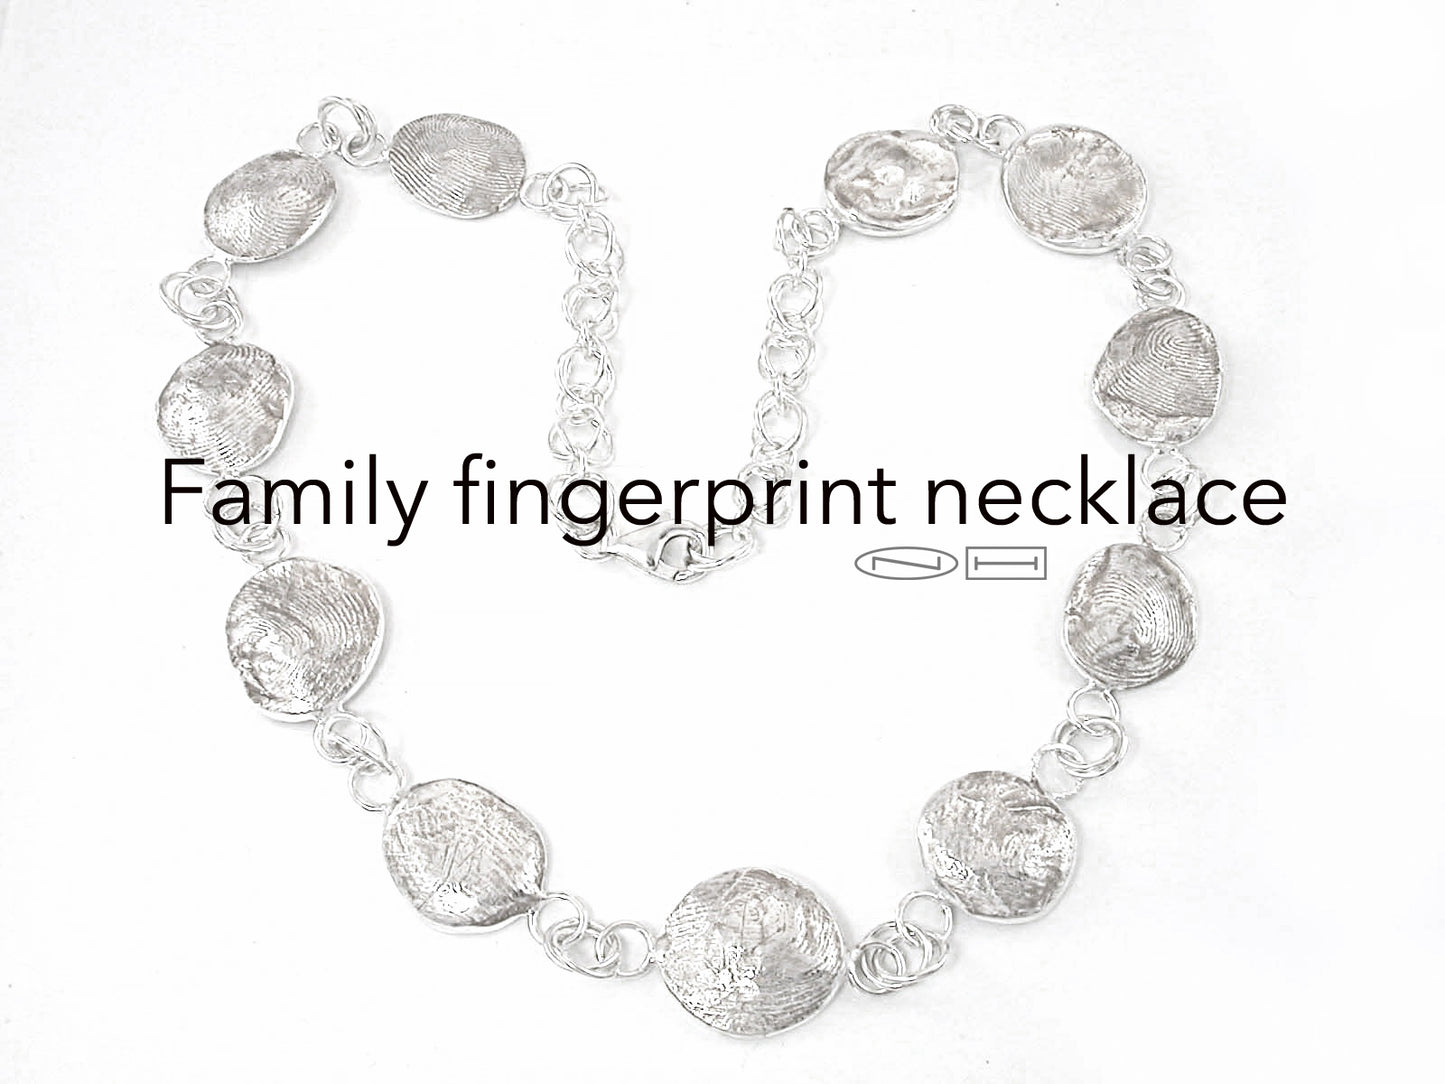 Personalized, fingerprint, thumbprint, dog print, jewellery made from 100% recycled silver, gold, platinum, and palladium, by ZEALmetal, Nicole Horlor, in Kingston, ON, Canada